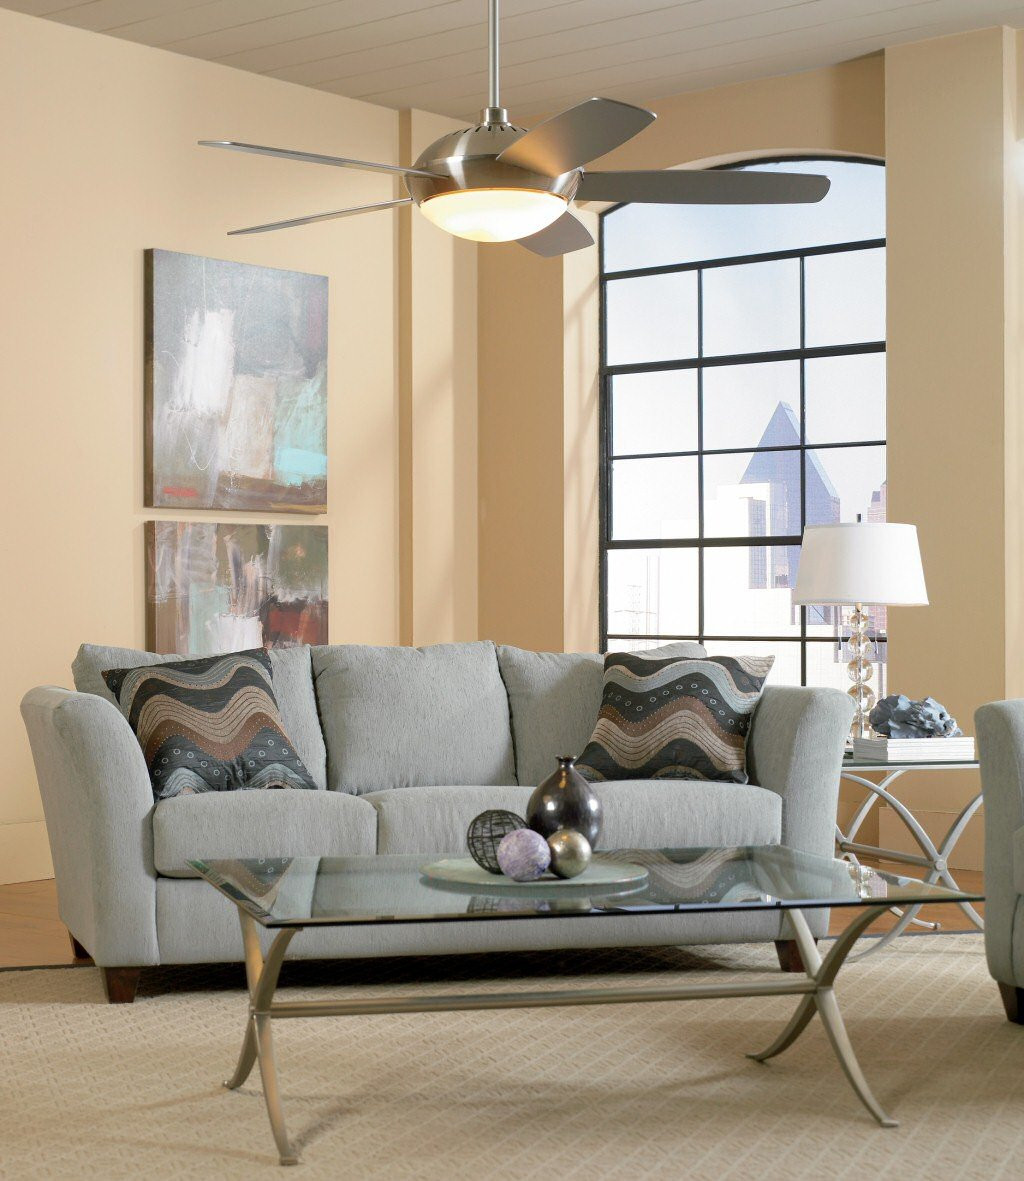 Home Depot Living Room Lights
 White Contemporary Ceiling Fans With Lights Reviews All